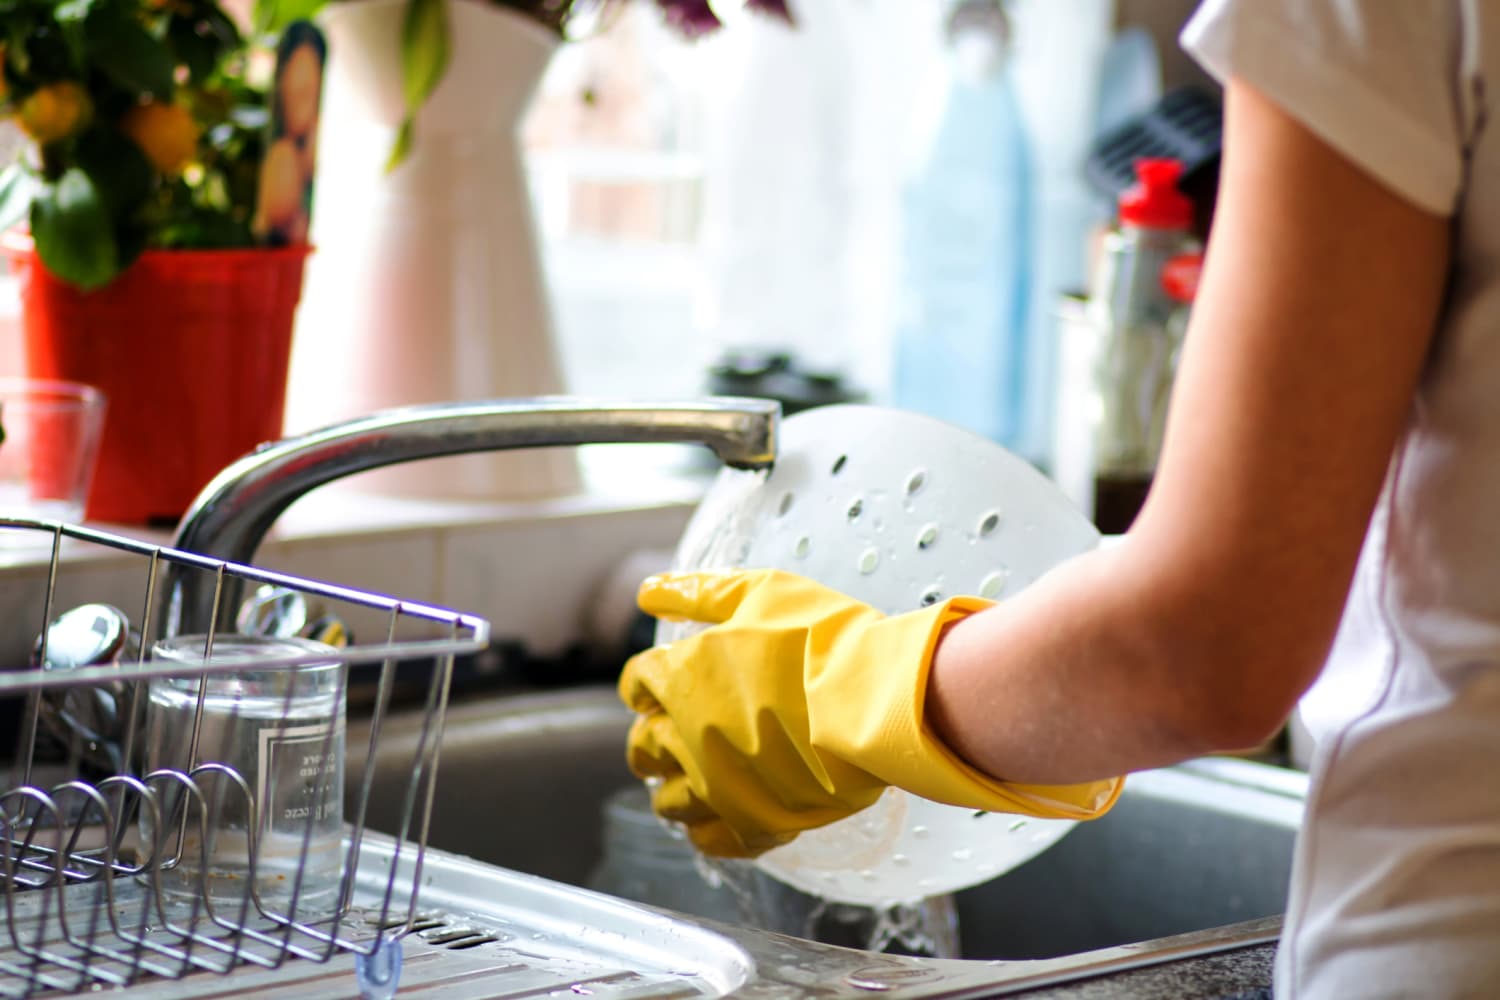 Hiring A House Cleaner Here Are 10 Important Questions To Ask In Your